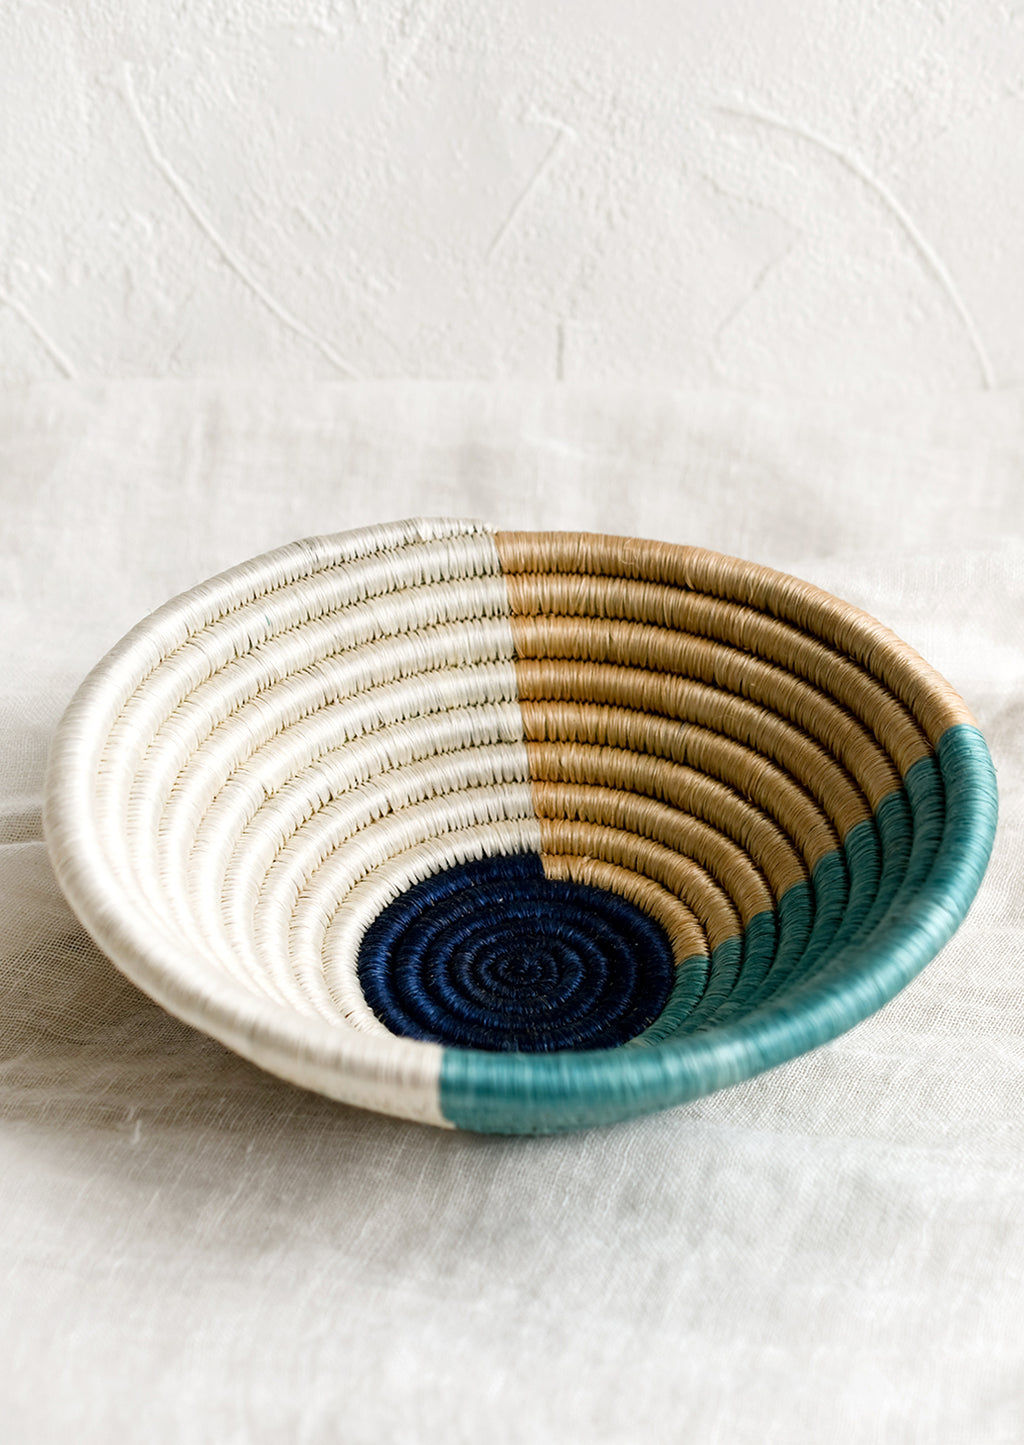 Navy Multi: A round sweetgrass bowl in navy pattern.